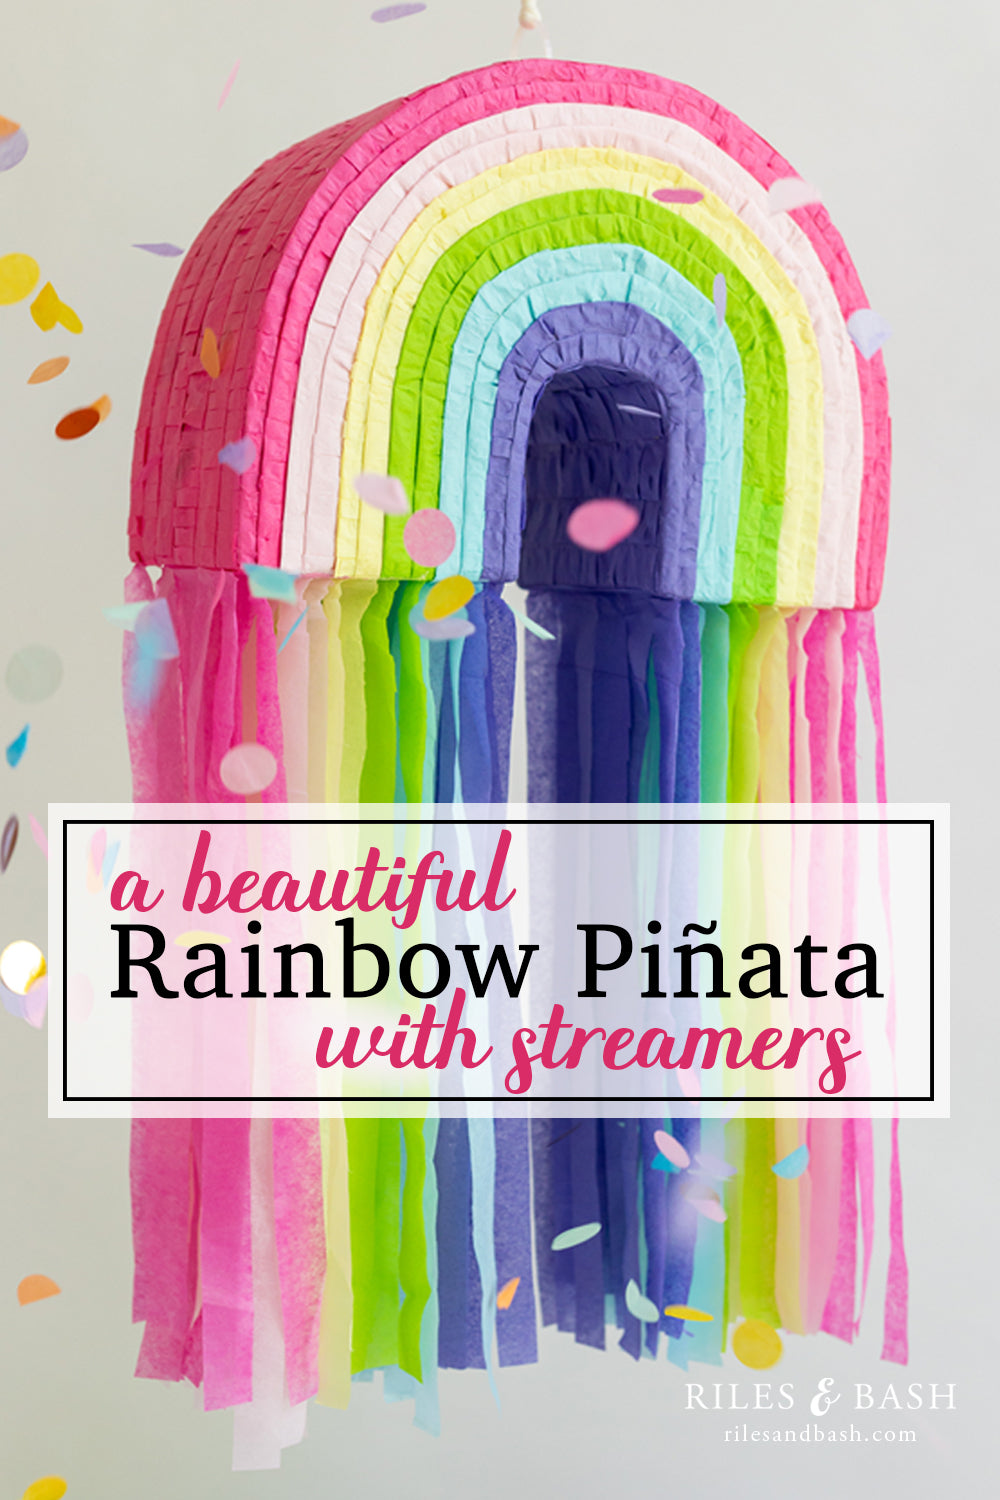 Riles & Bash_Rainbow Pinata with Colorful Streamers